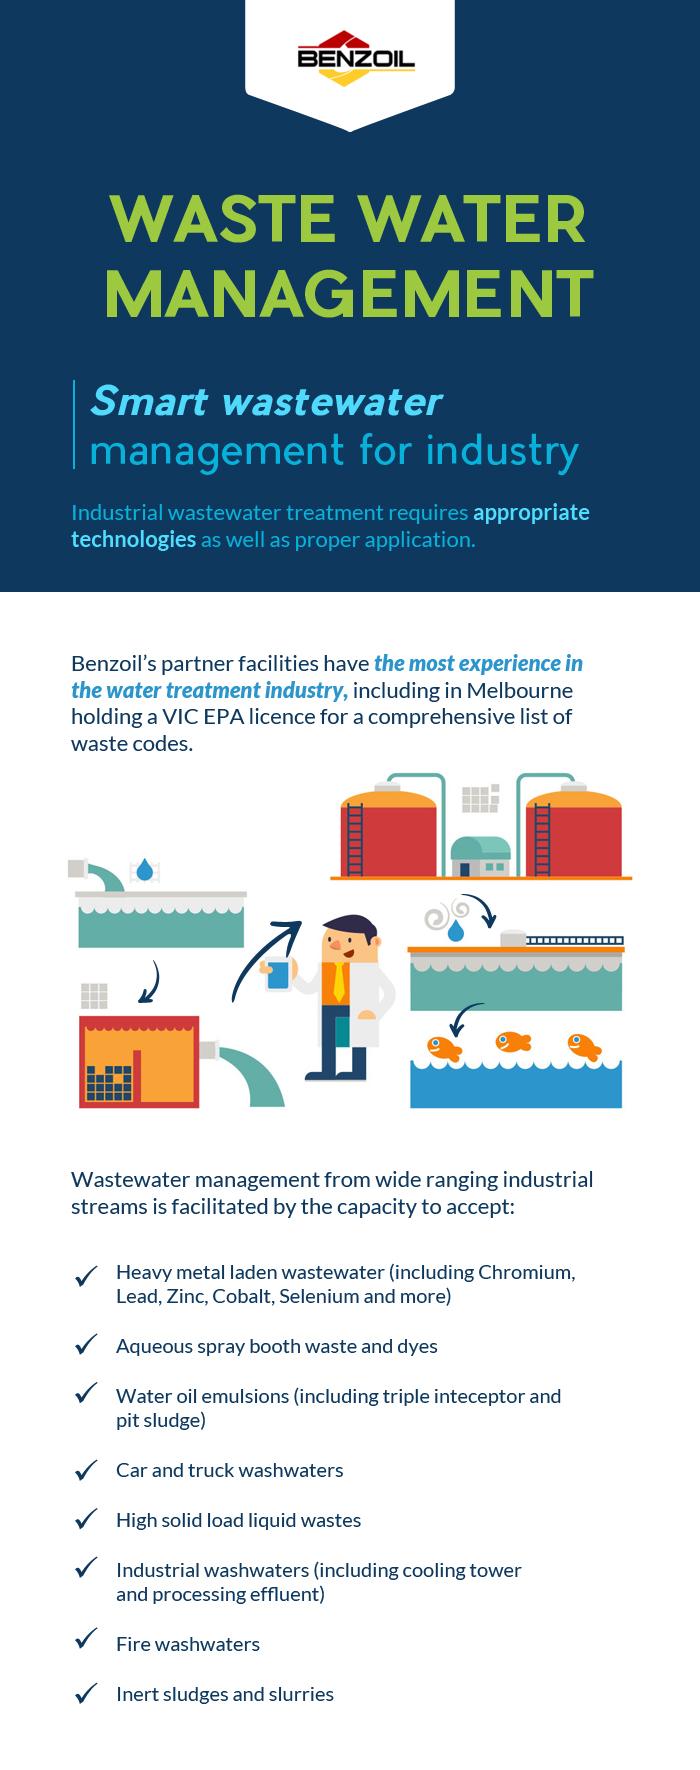 Avail Smart Wastewater Management Services for Industry at Benzoil